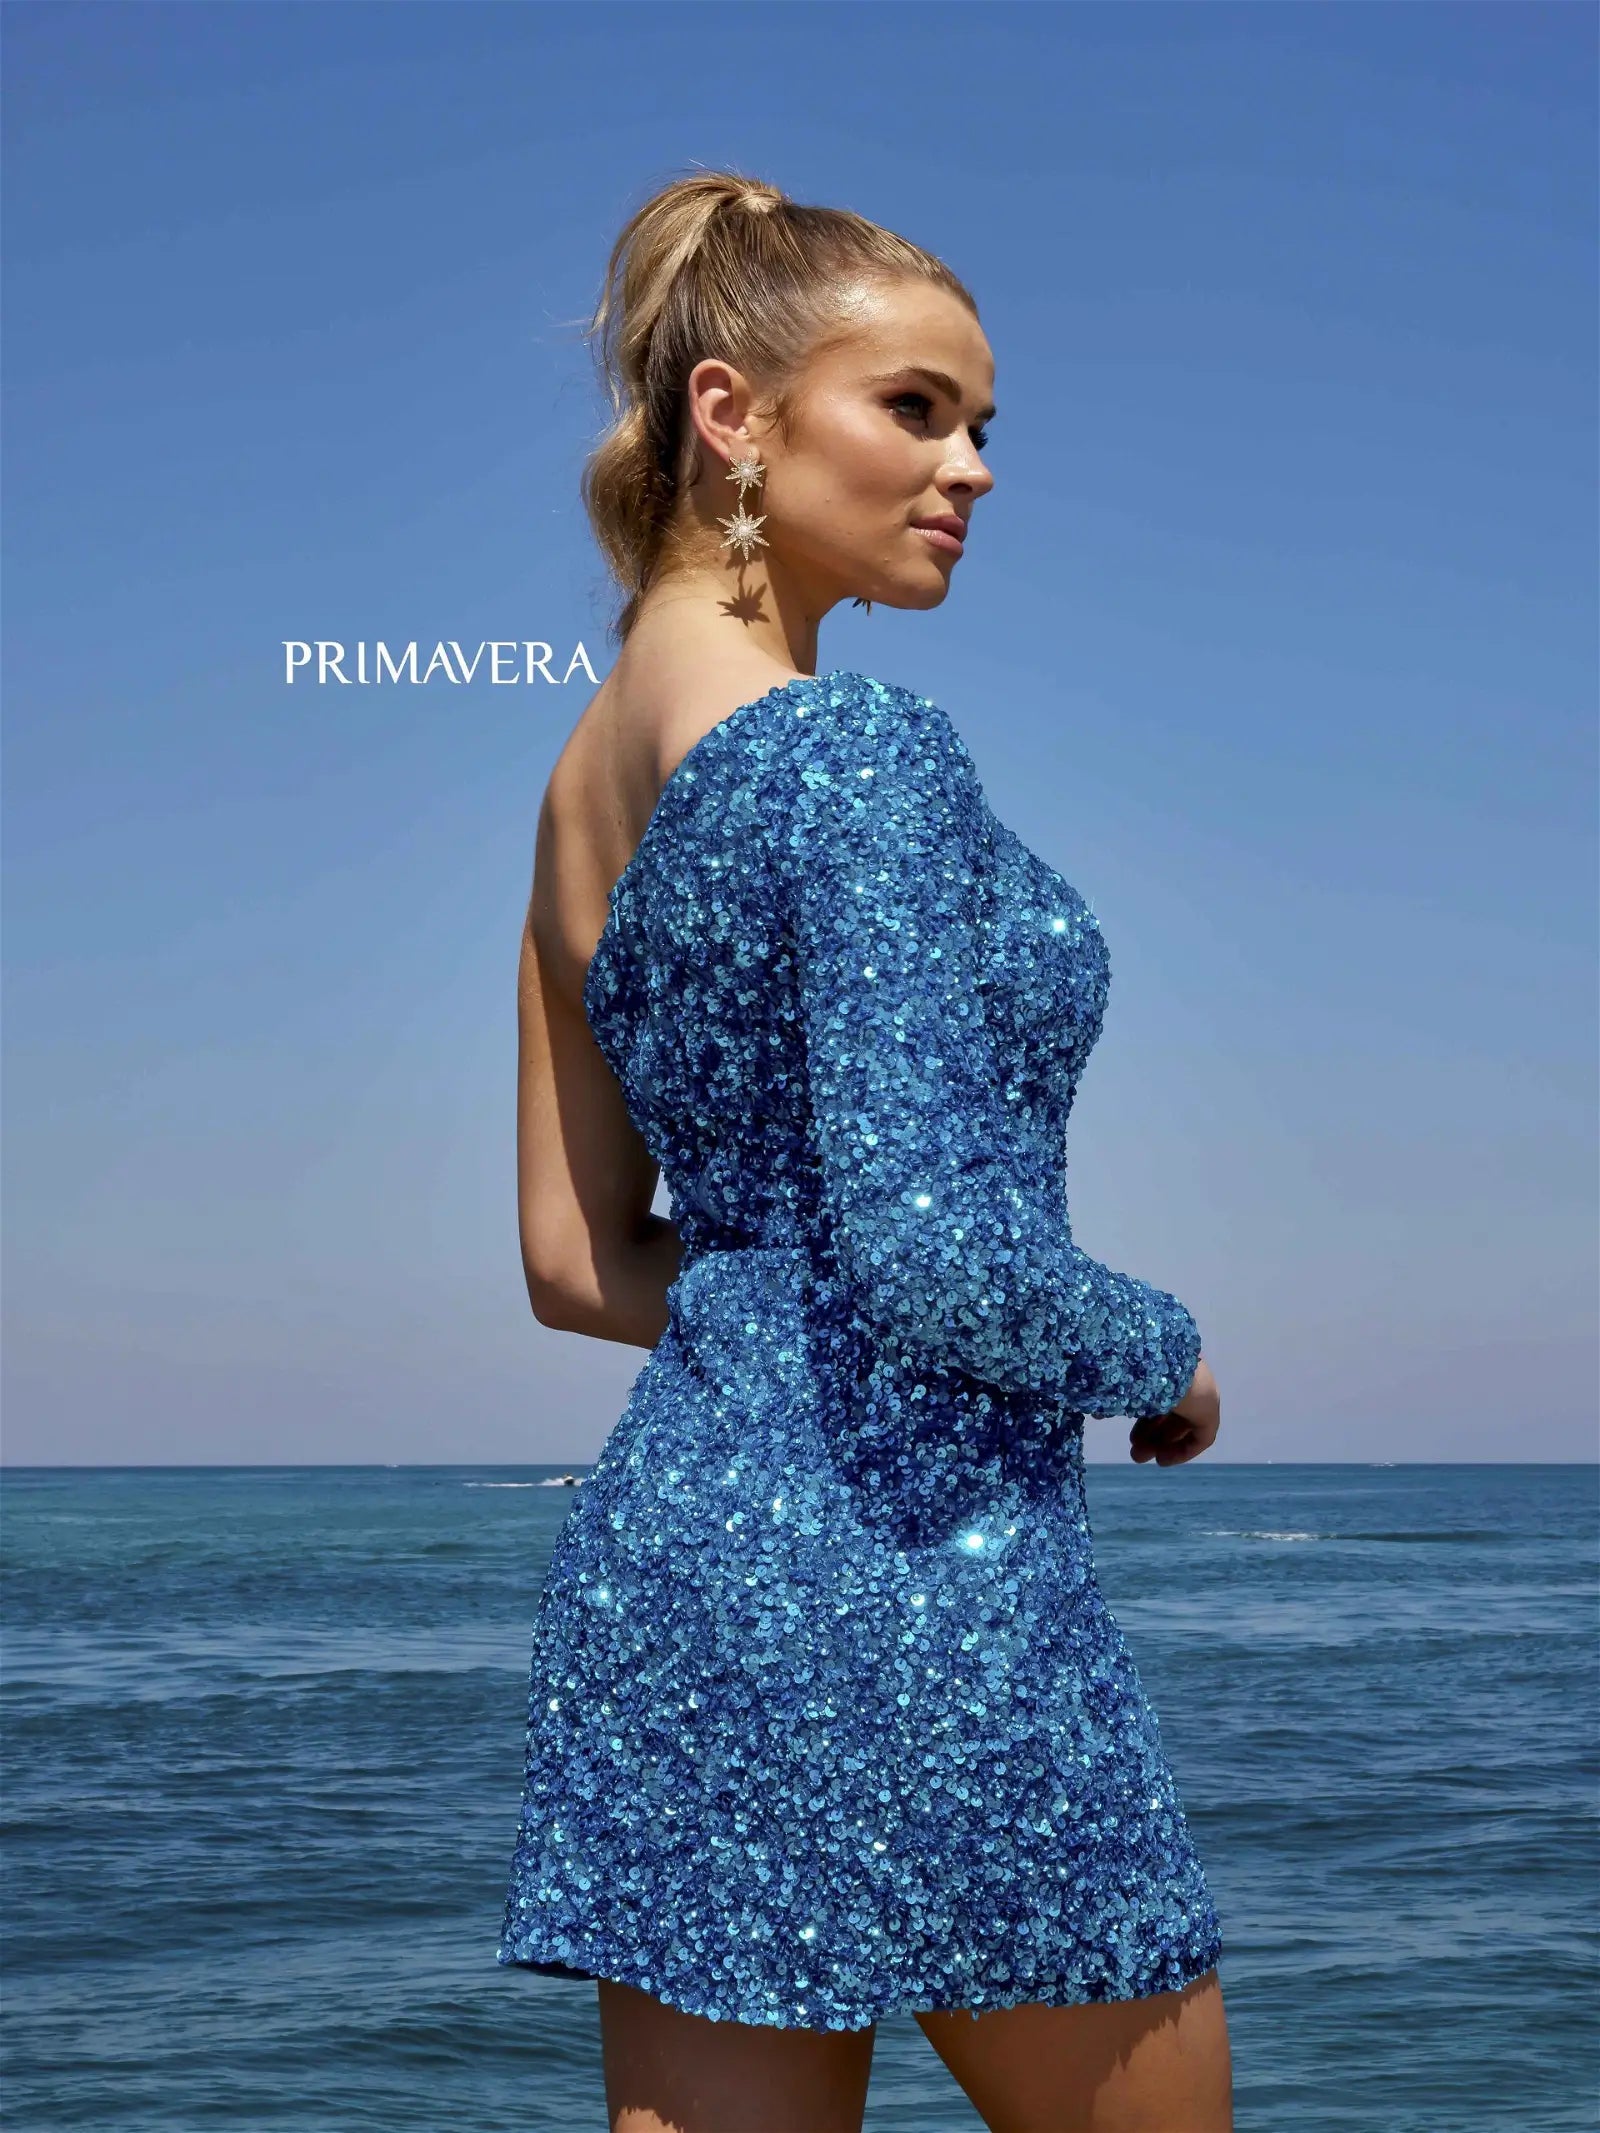 Look stunning for your homecoming with this Primavera Couture 3860 Short Homecoming dress. The fitted silhouette is intricately beaded with sequins and features a one-shoulder long sleeve and a maxi slit. Ready to make a grand entrance.